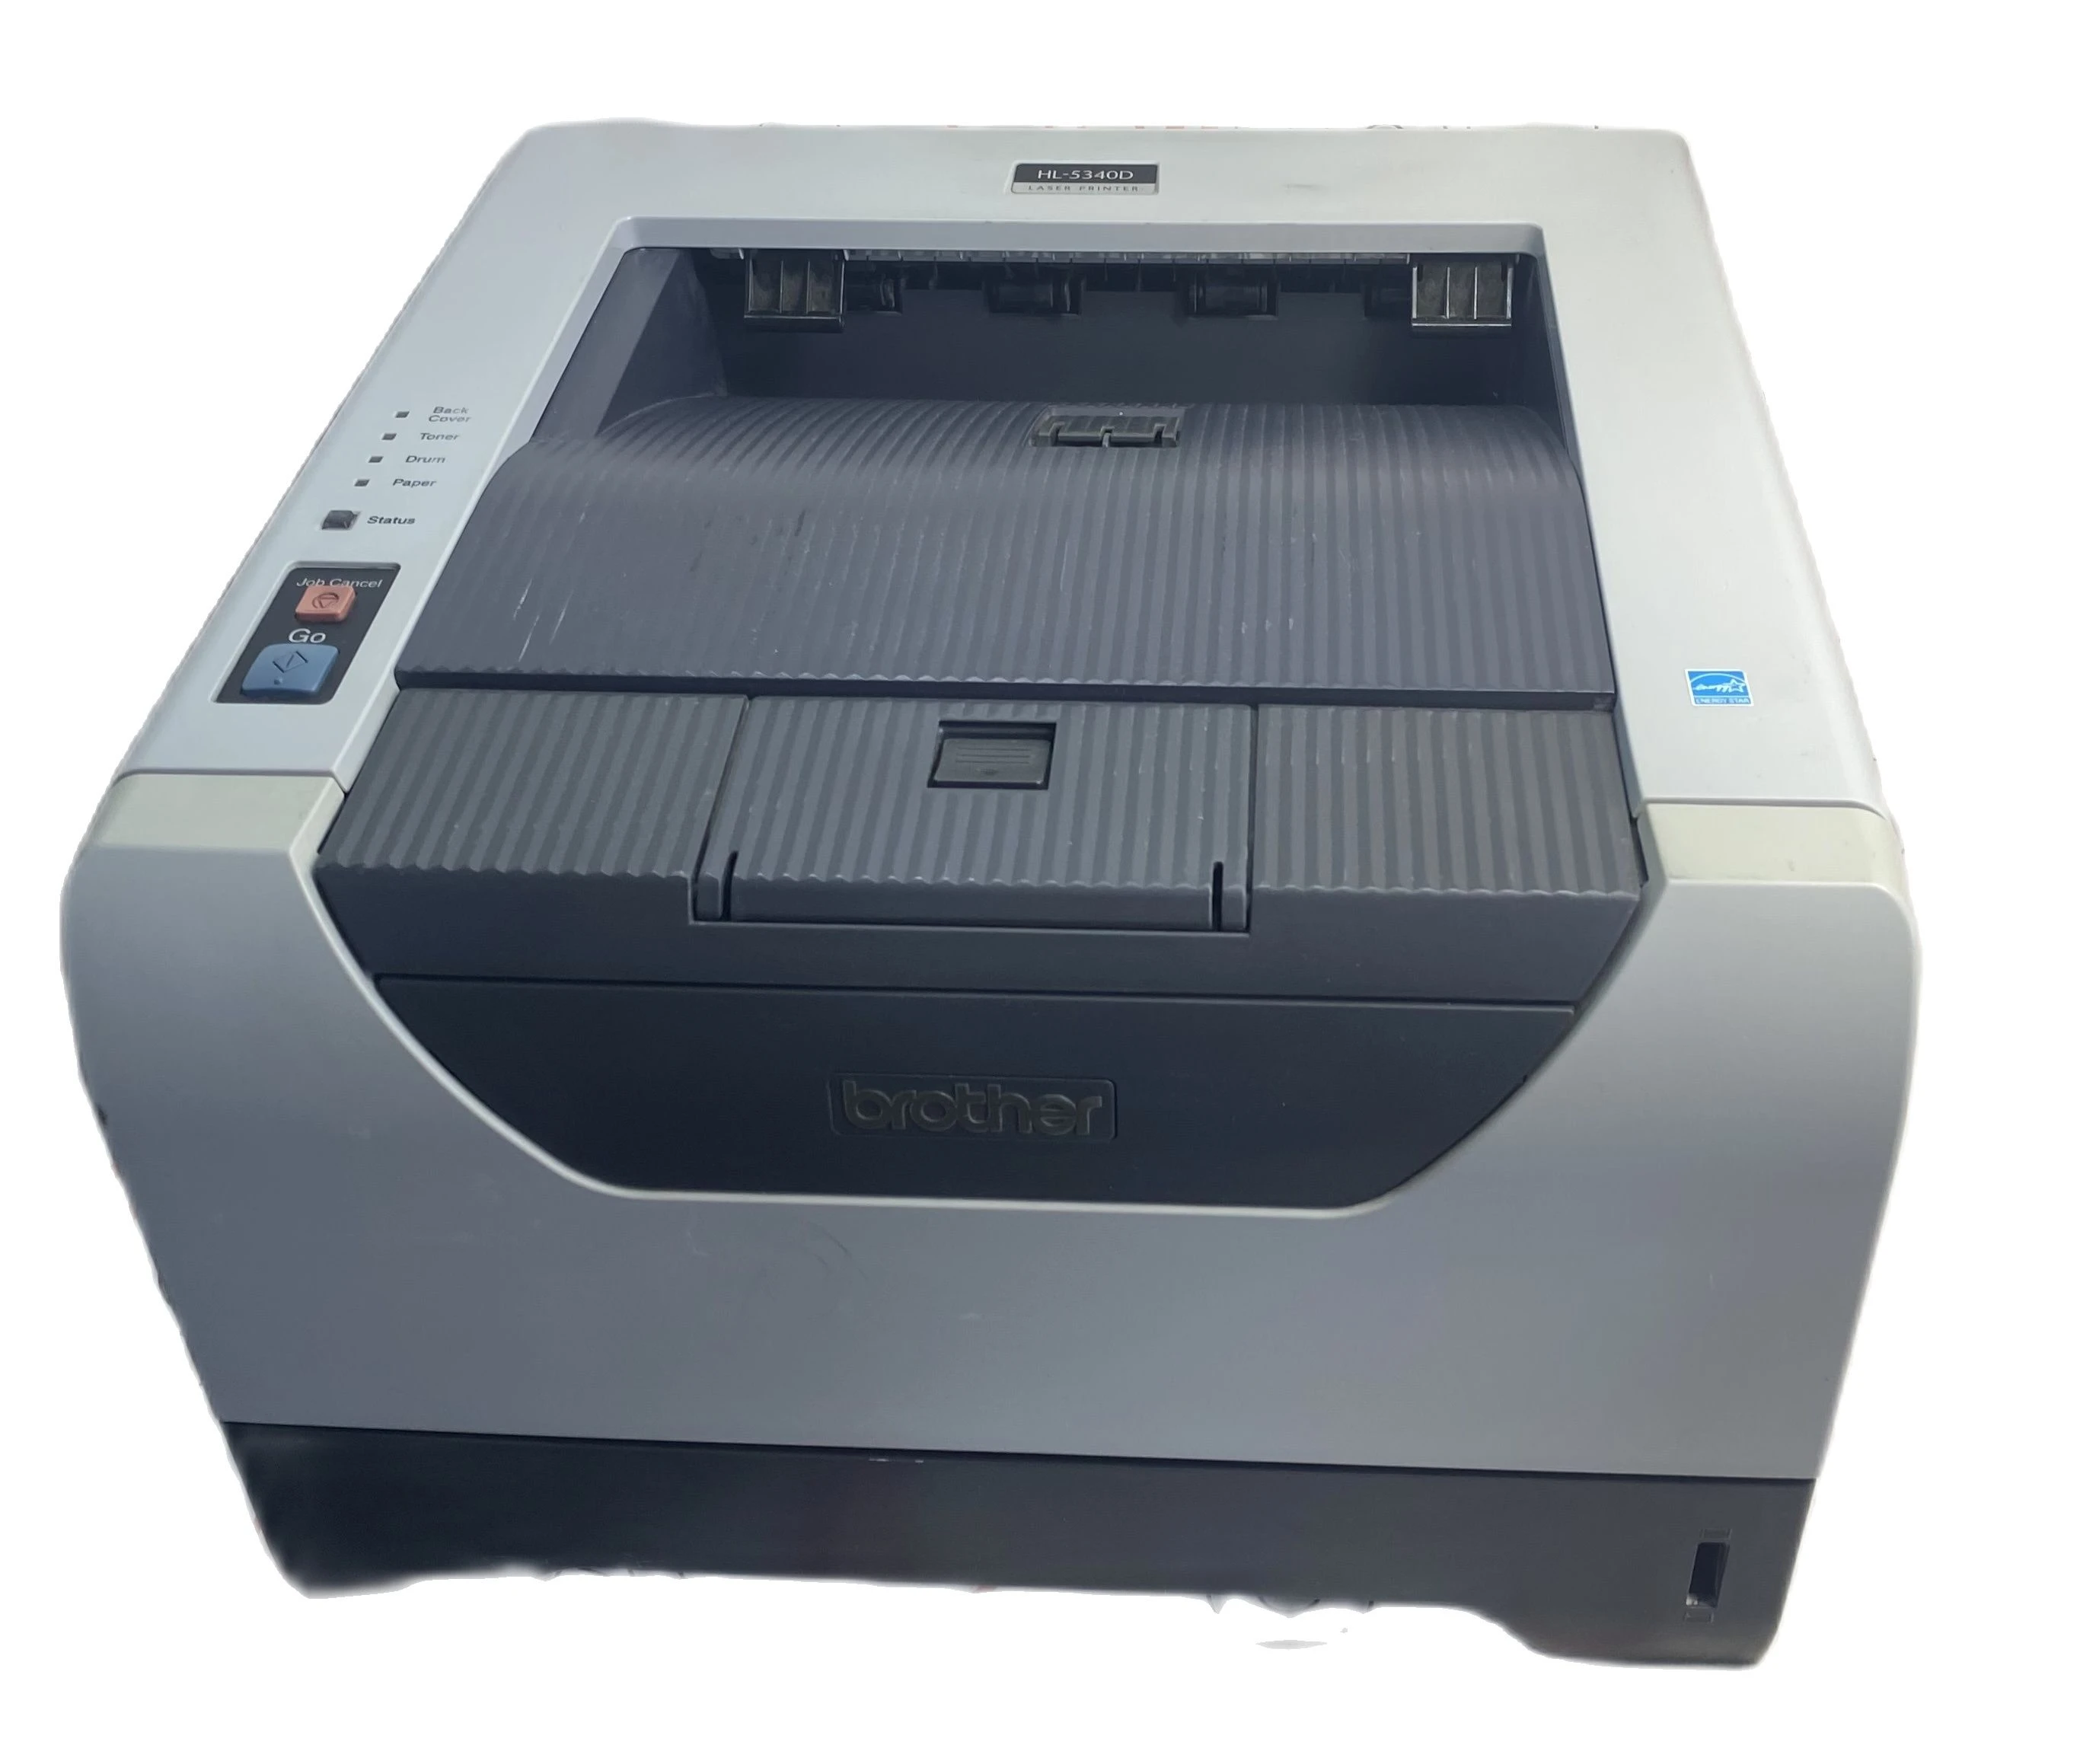 Printer Laser Brother Hl-5340d All-in-one Laser Printer Multi-function Office Computer - Printers - AliExpress